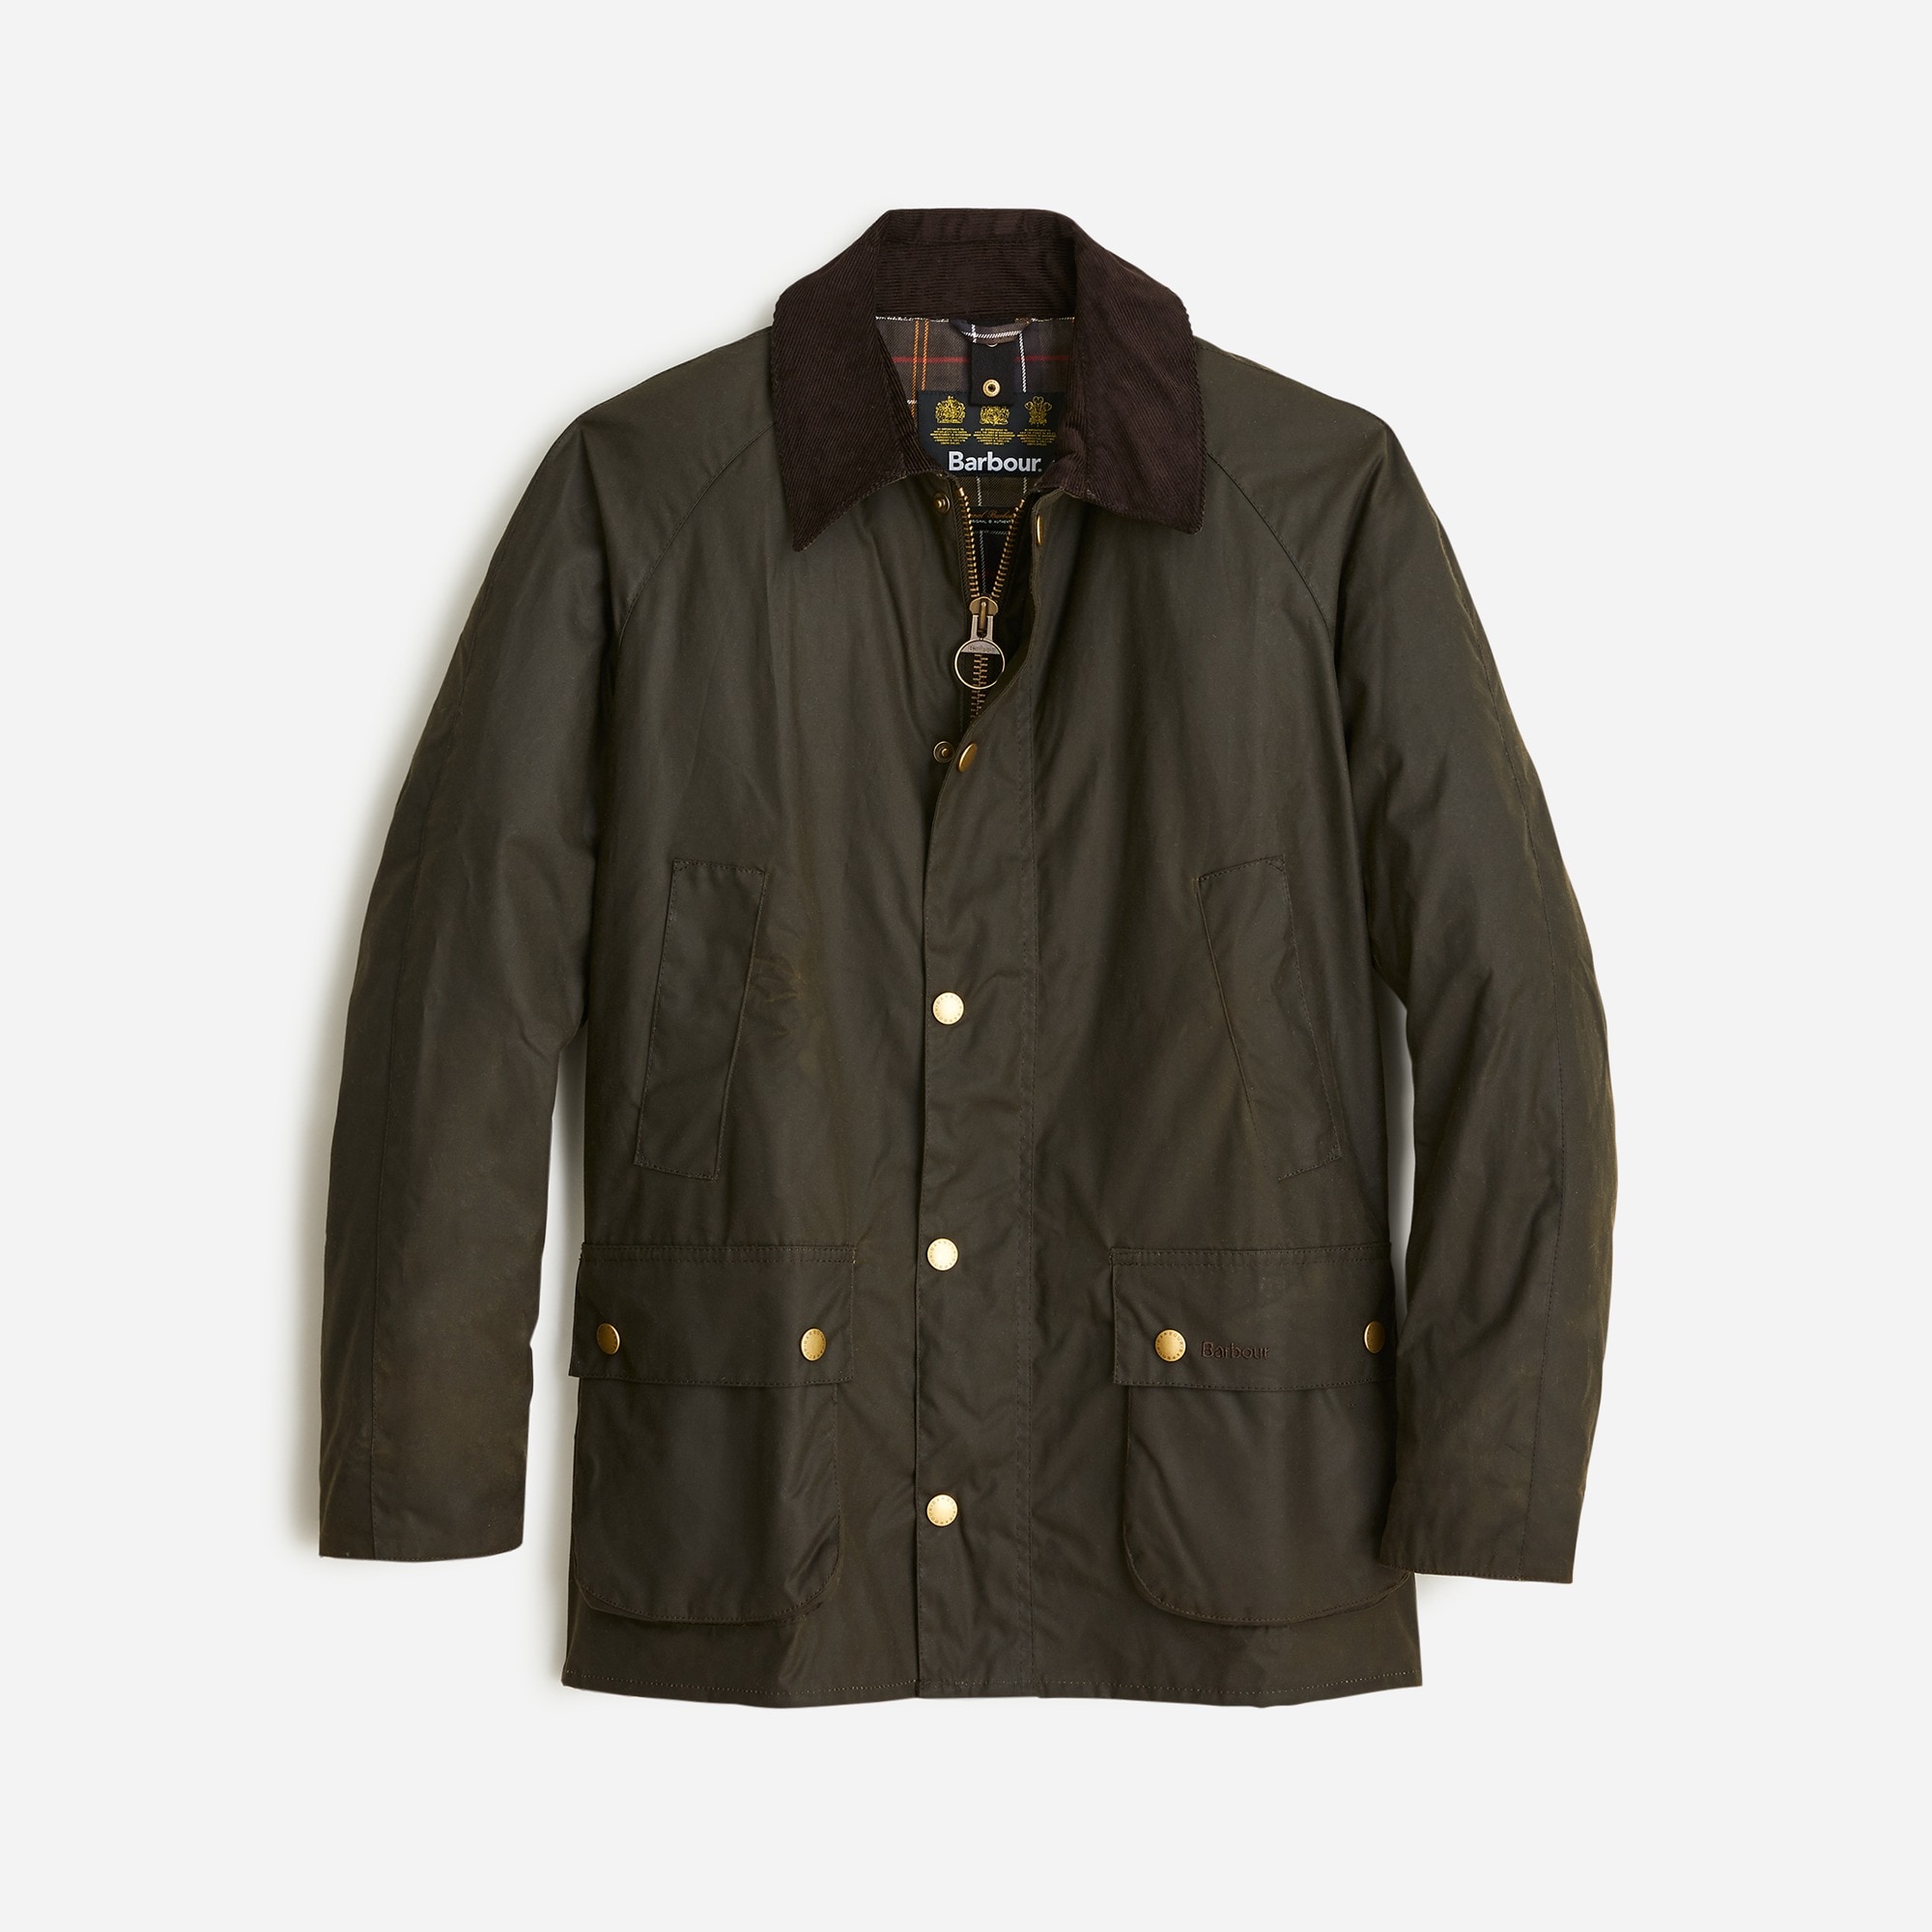 J.Crew: Barbour® Sylkoil Ashby Jacket 